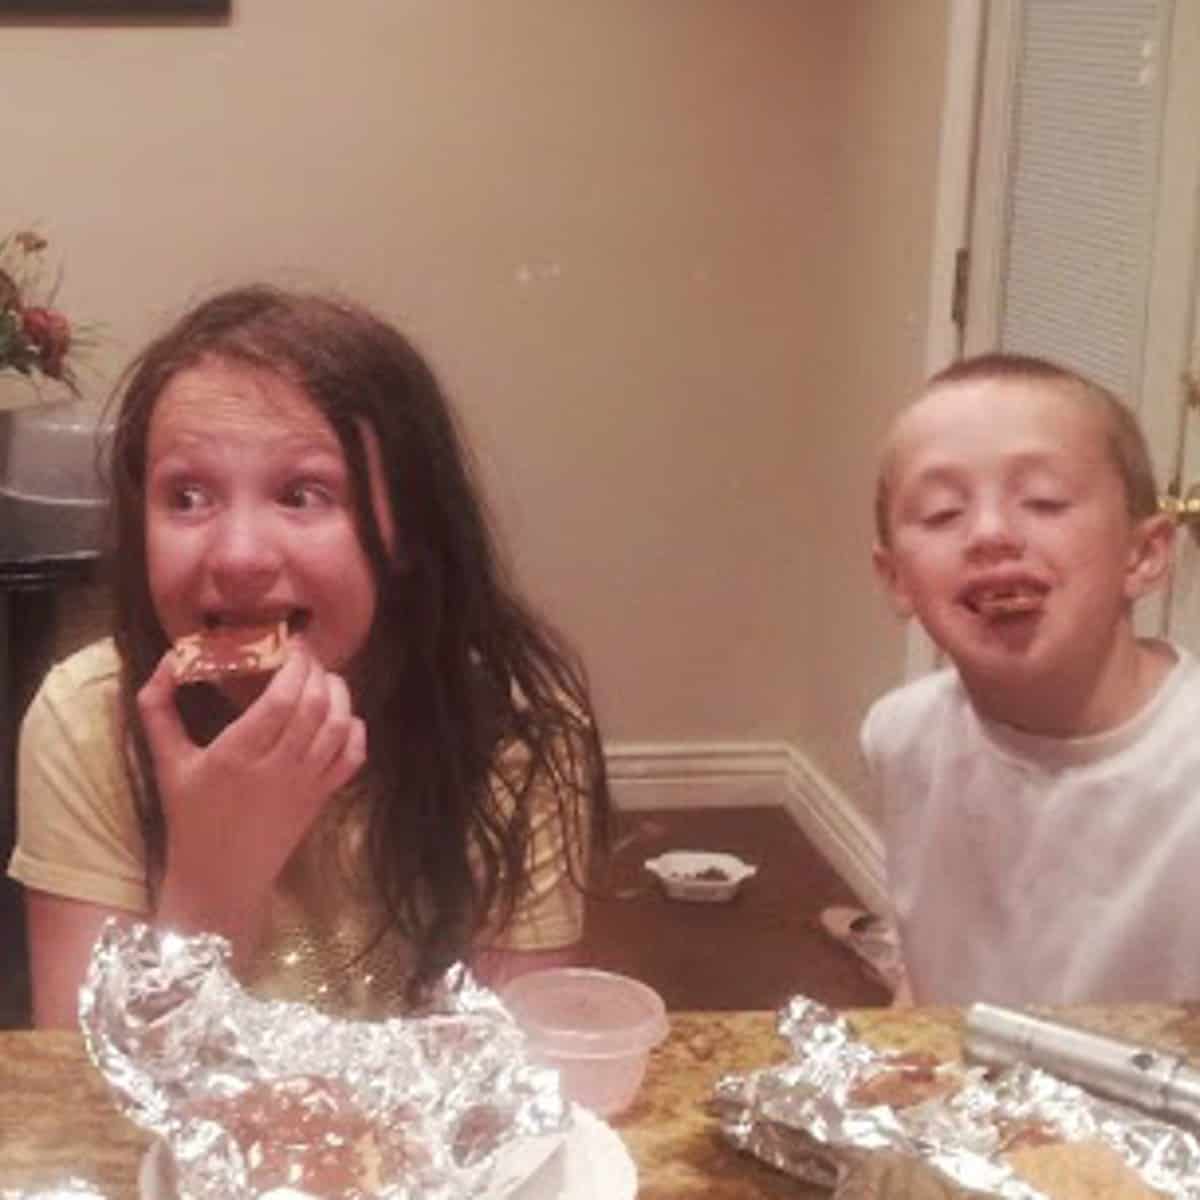 two children enjoying a tin foil smores dessert. the children have chocolate and marshmallow all over their faces and fingers